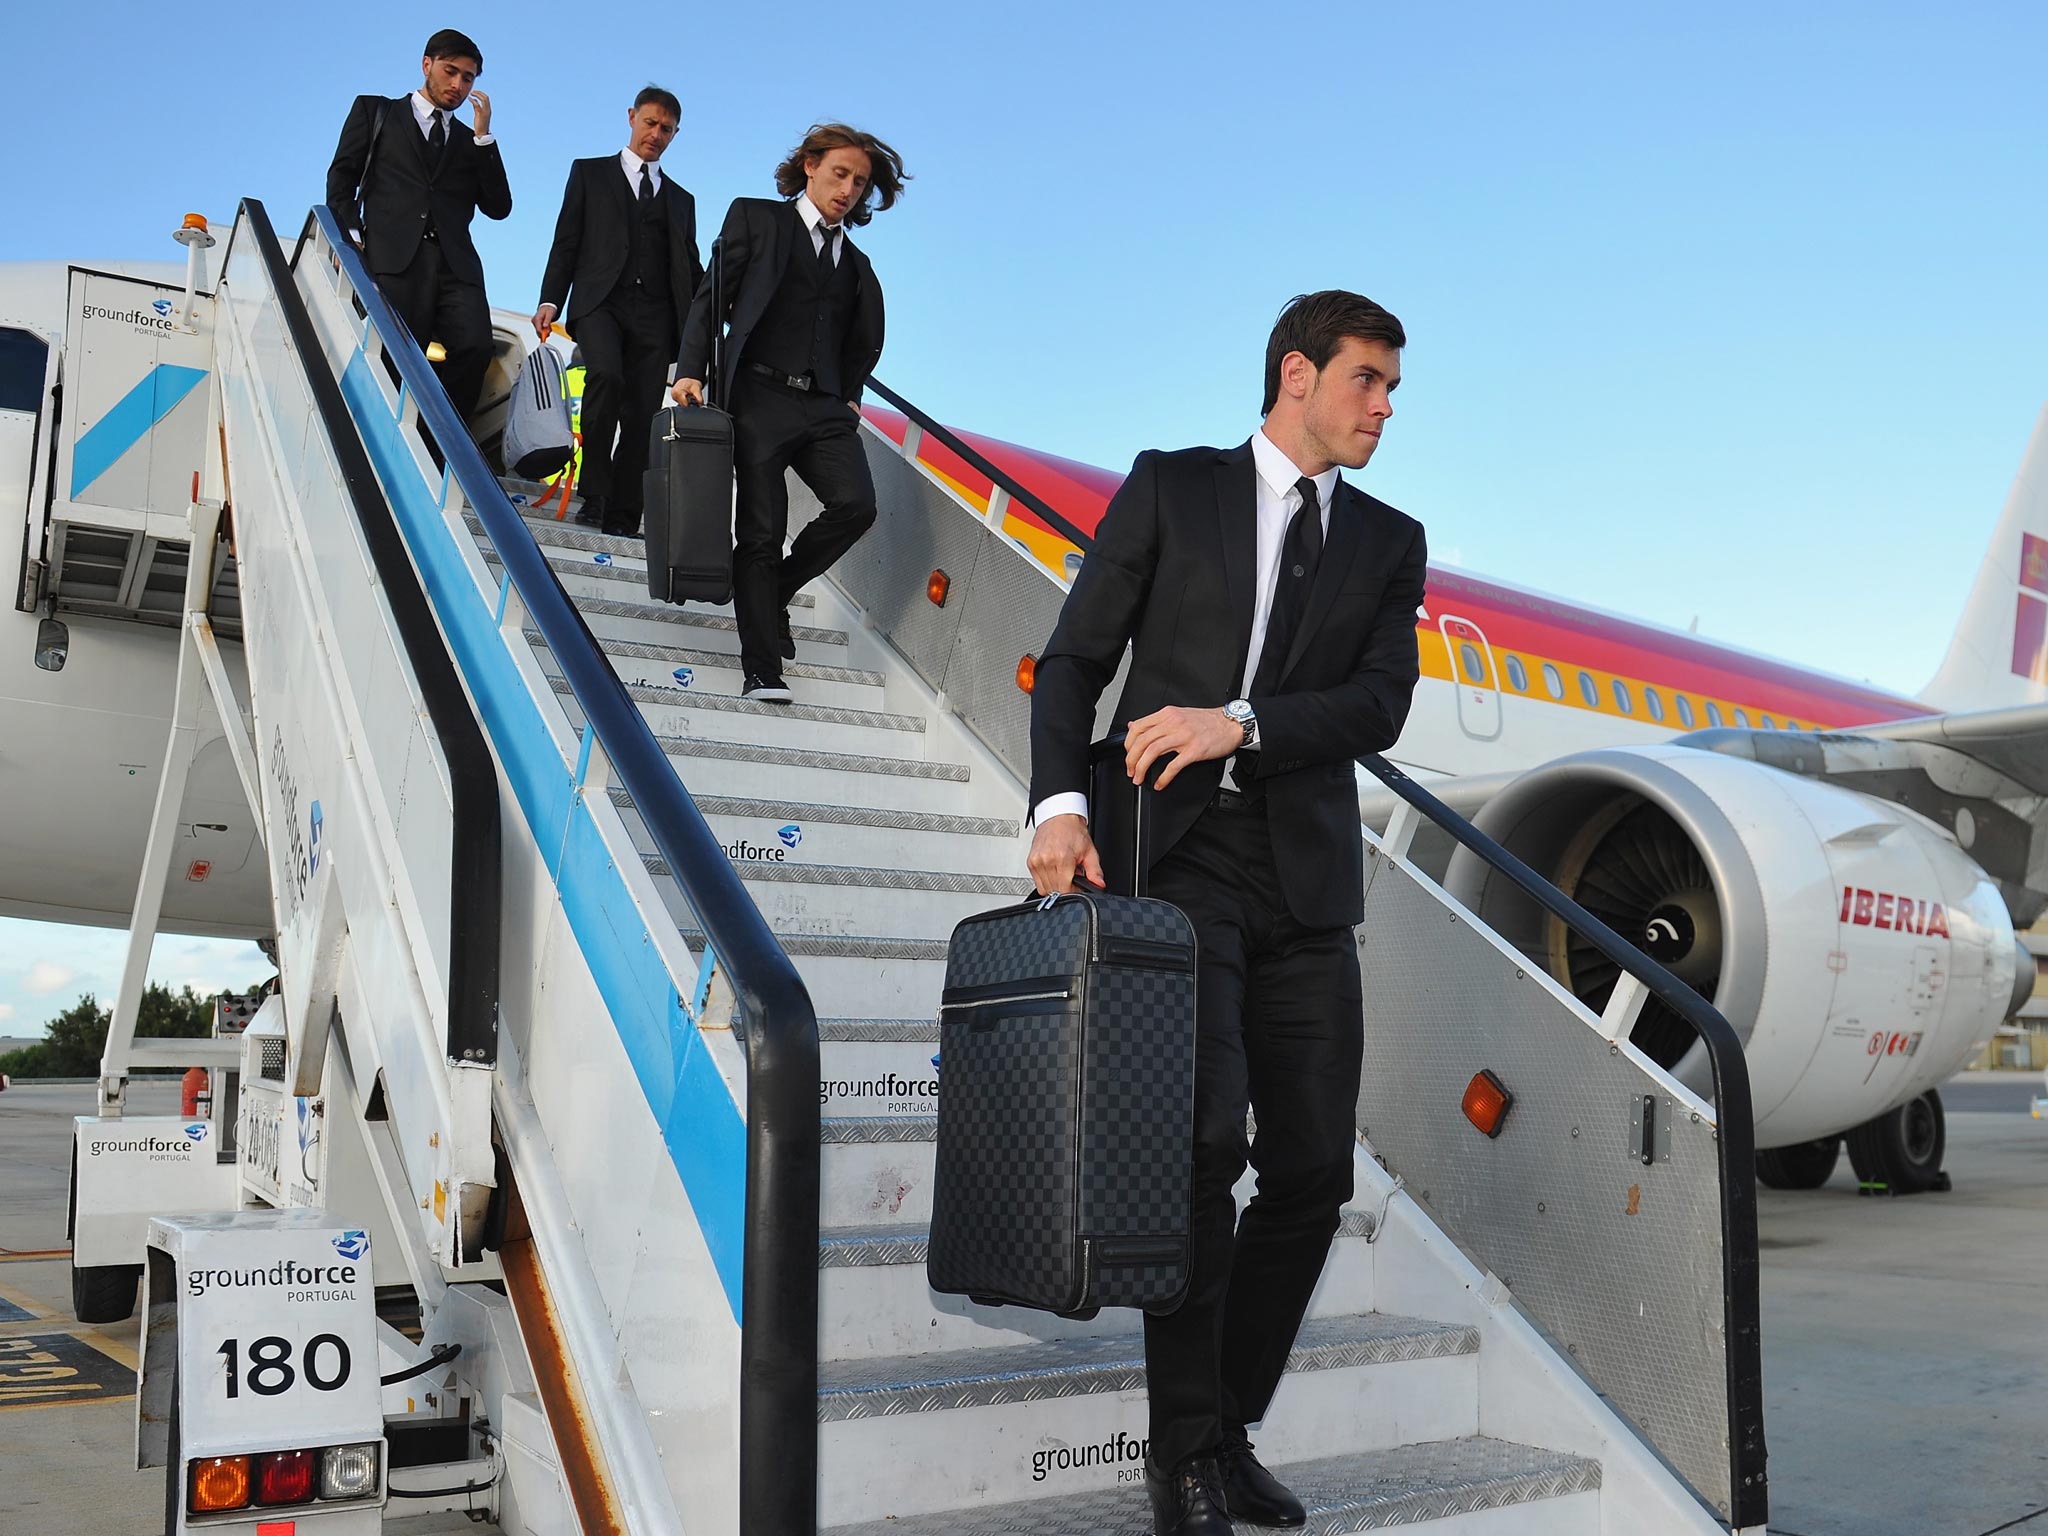 Gareth Bale (right) and his Real Madrid team-mates
arrive in Lisbon for the European Cup final